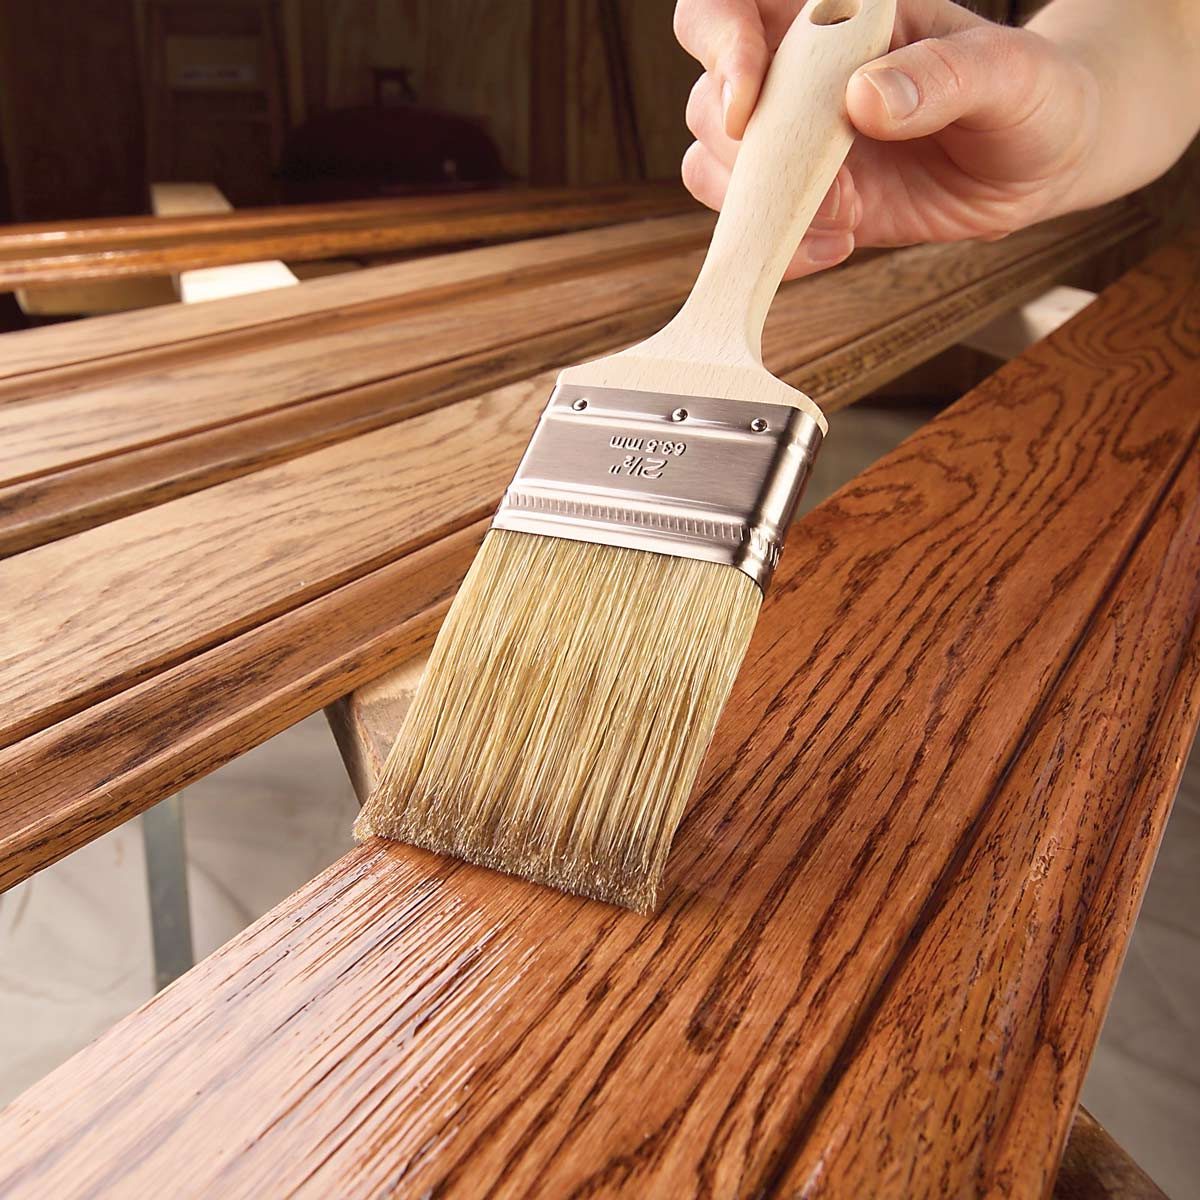 11 Tips on How to Finish Wood Trim The Family Handyman